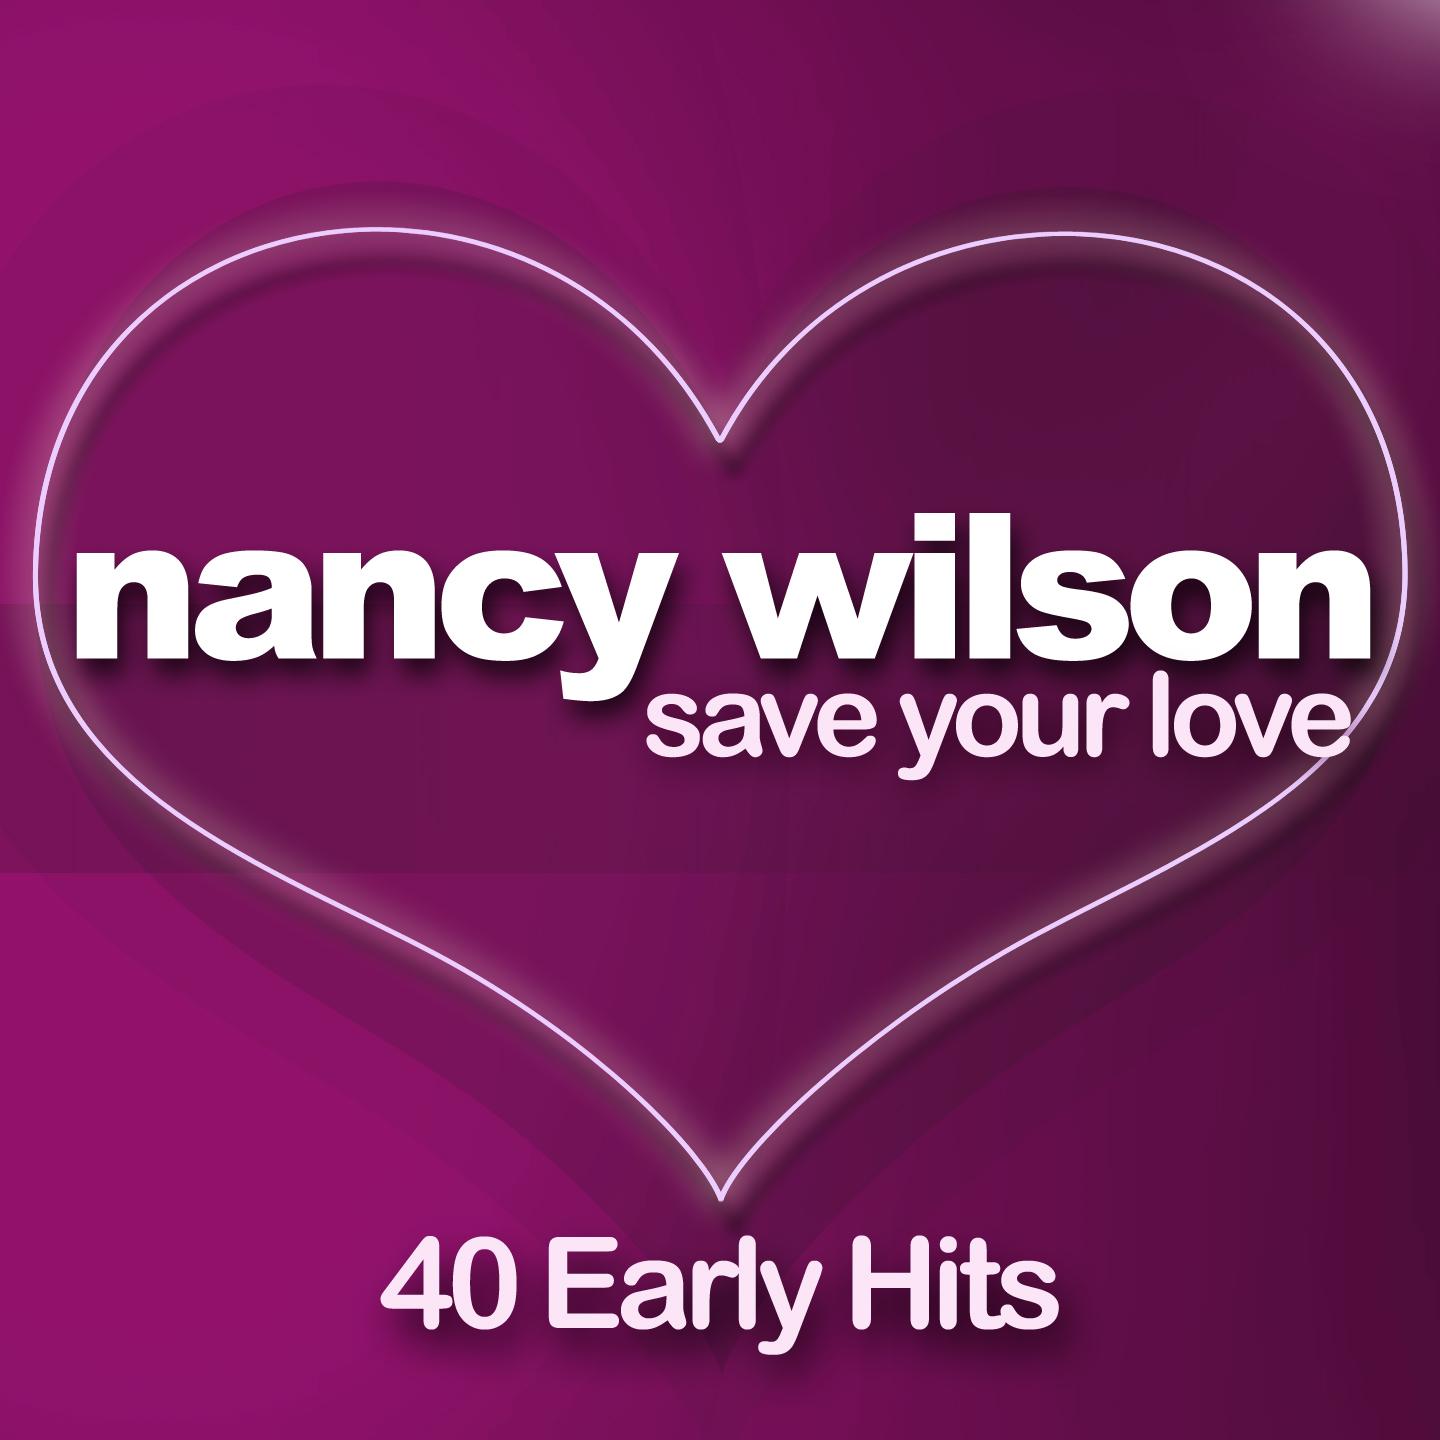 Save Your Love - 40 Early Hits